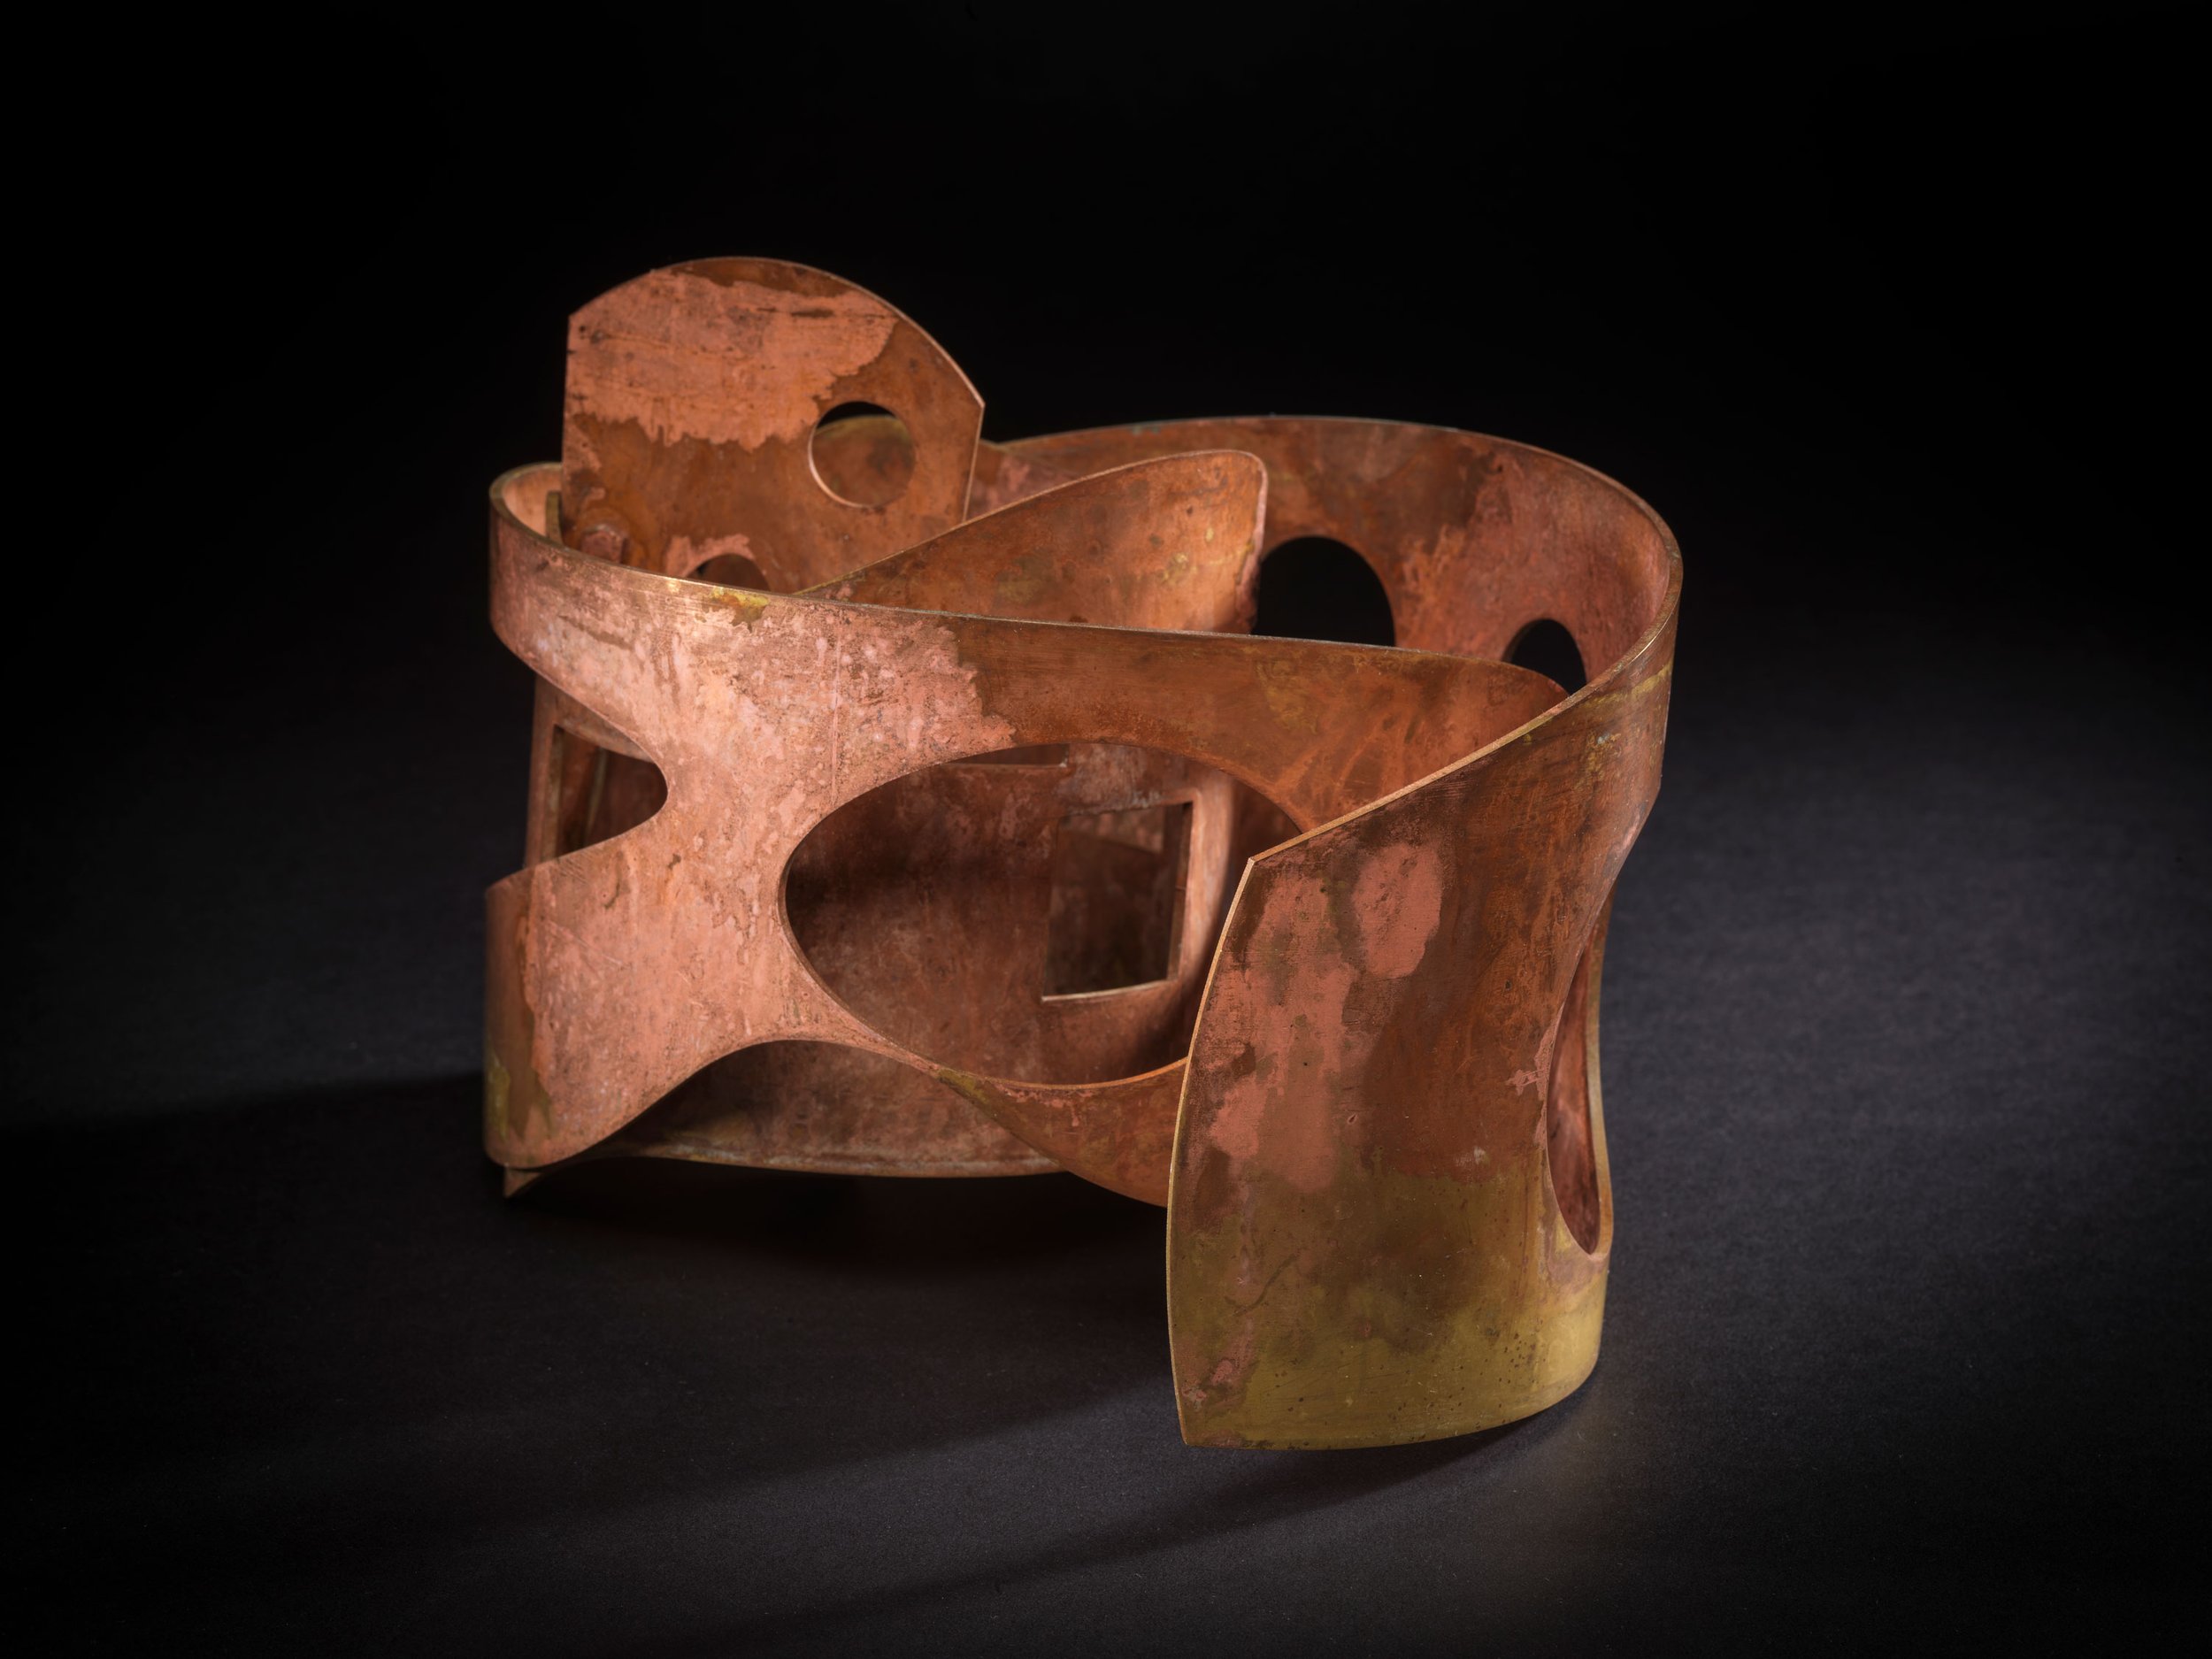 Act-of-Instance-No.-5,-2020,-patinated-brass,-22x16x17cm,-JL270820_0098-1.jpg